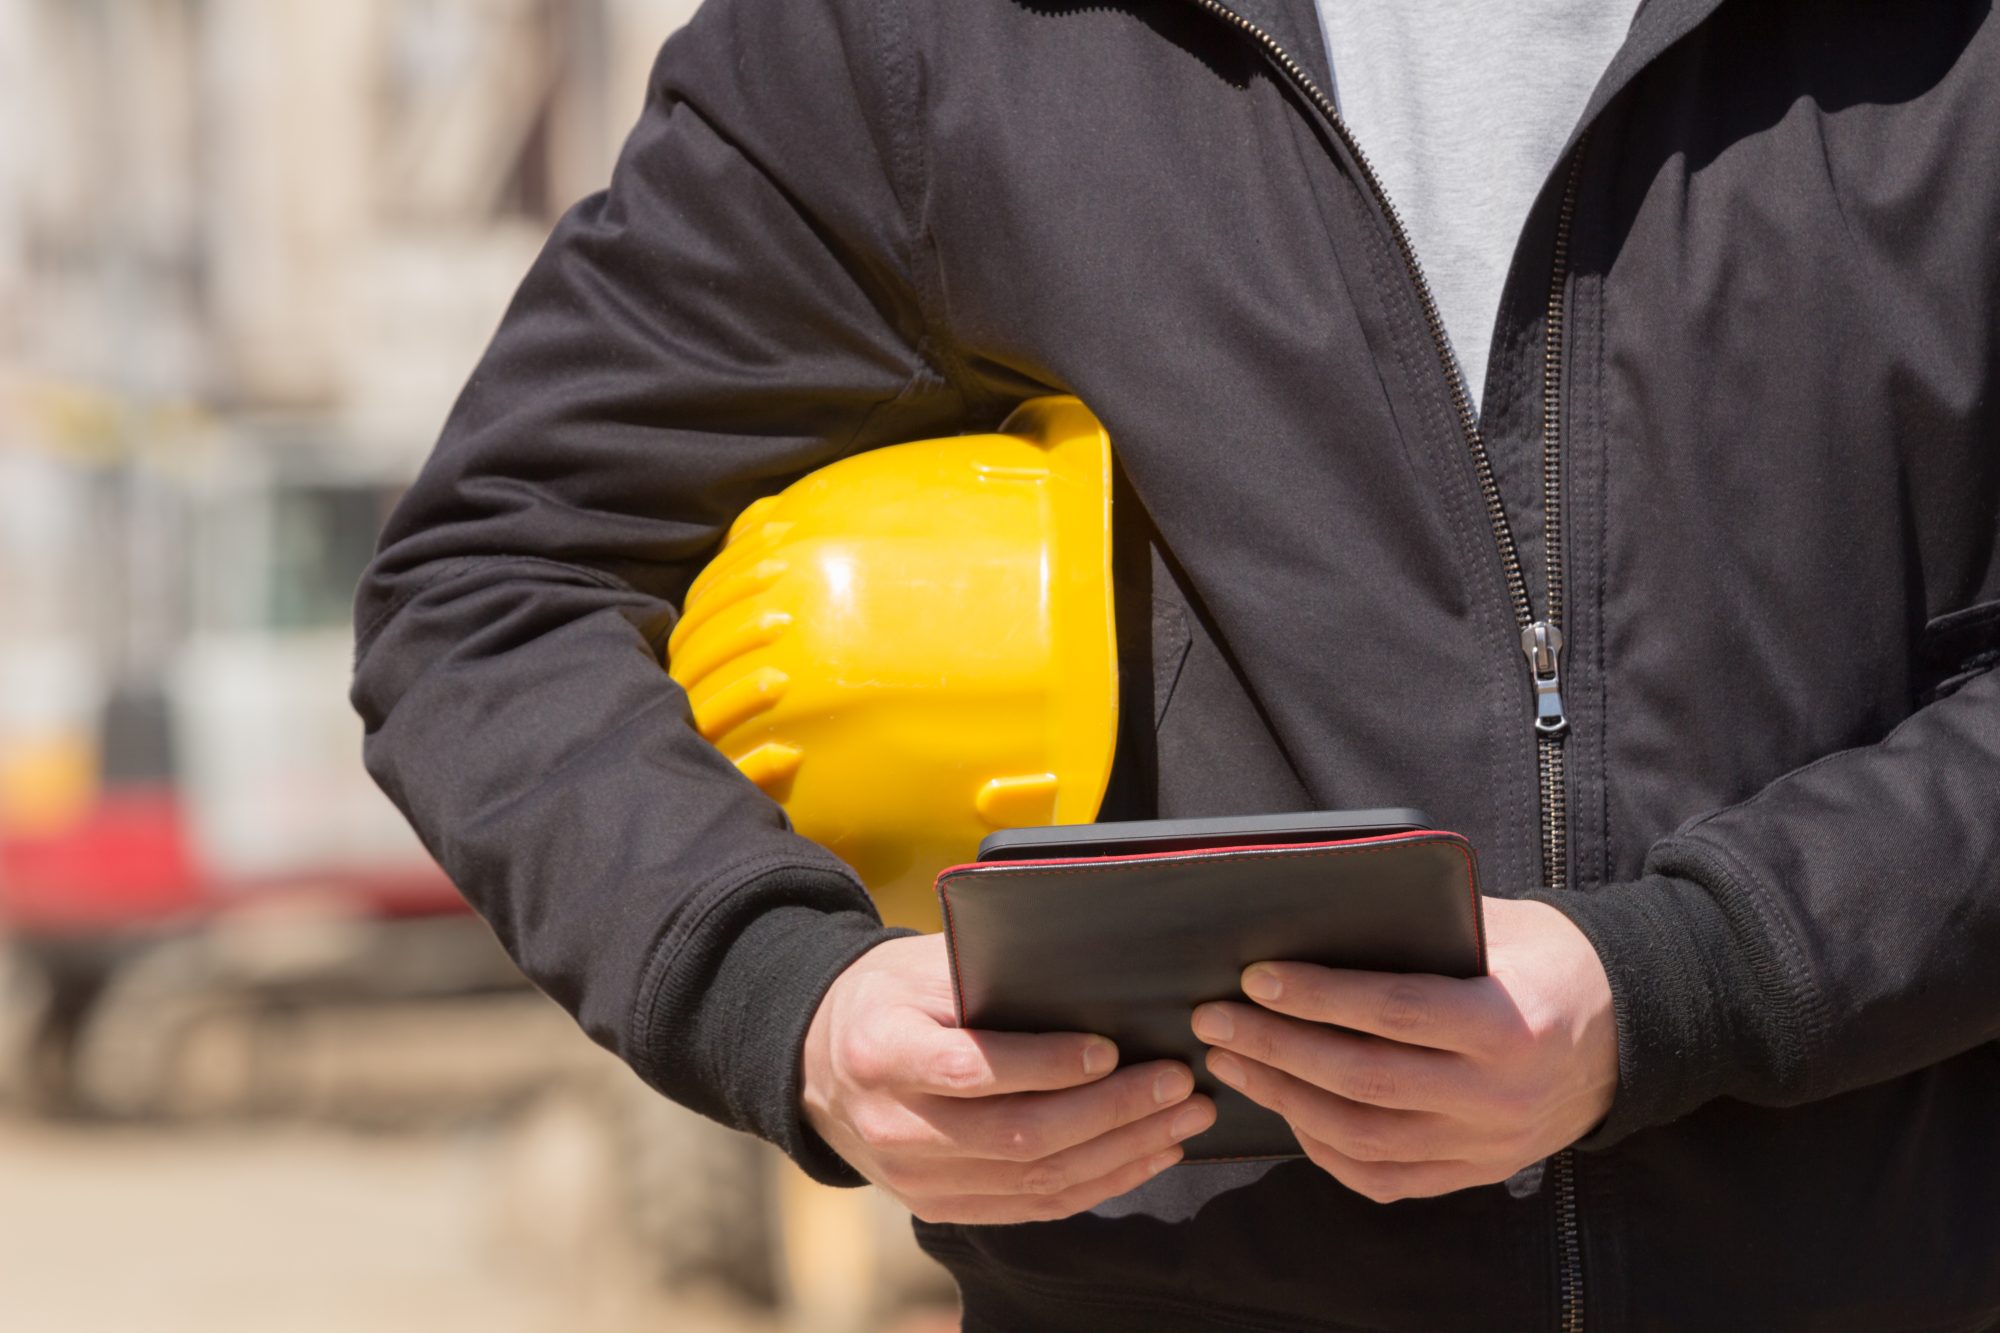 Construction engineer making notes on a tablet and holding a yellow hard hat